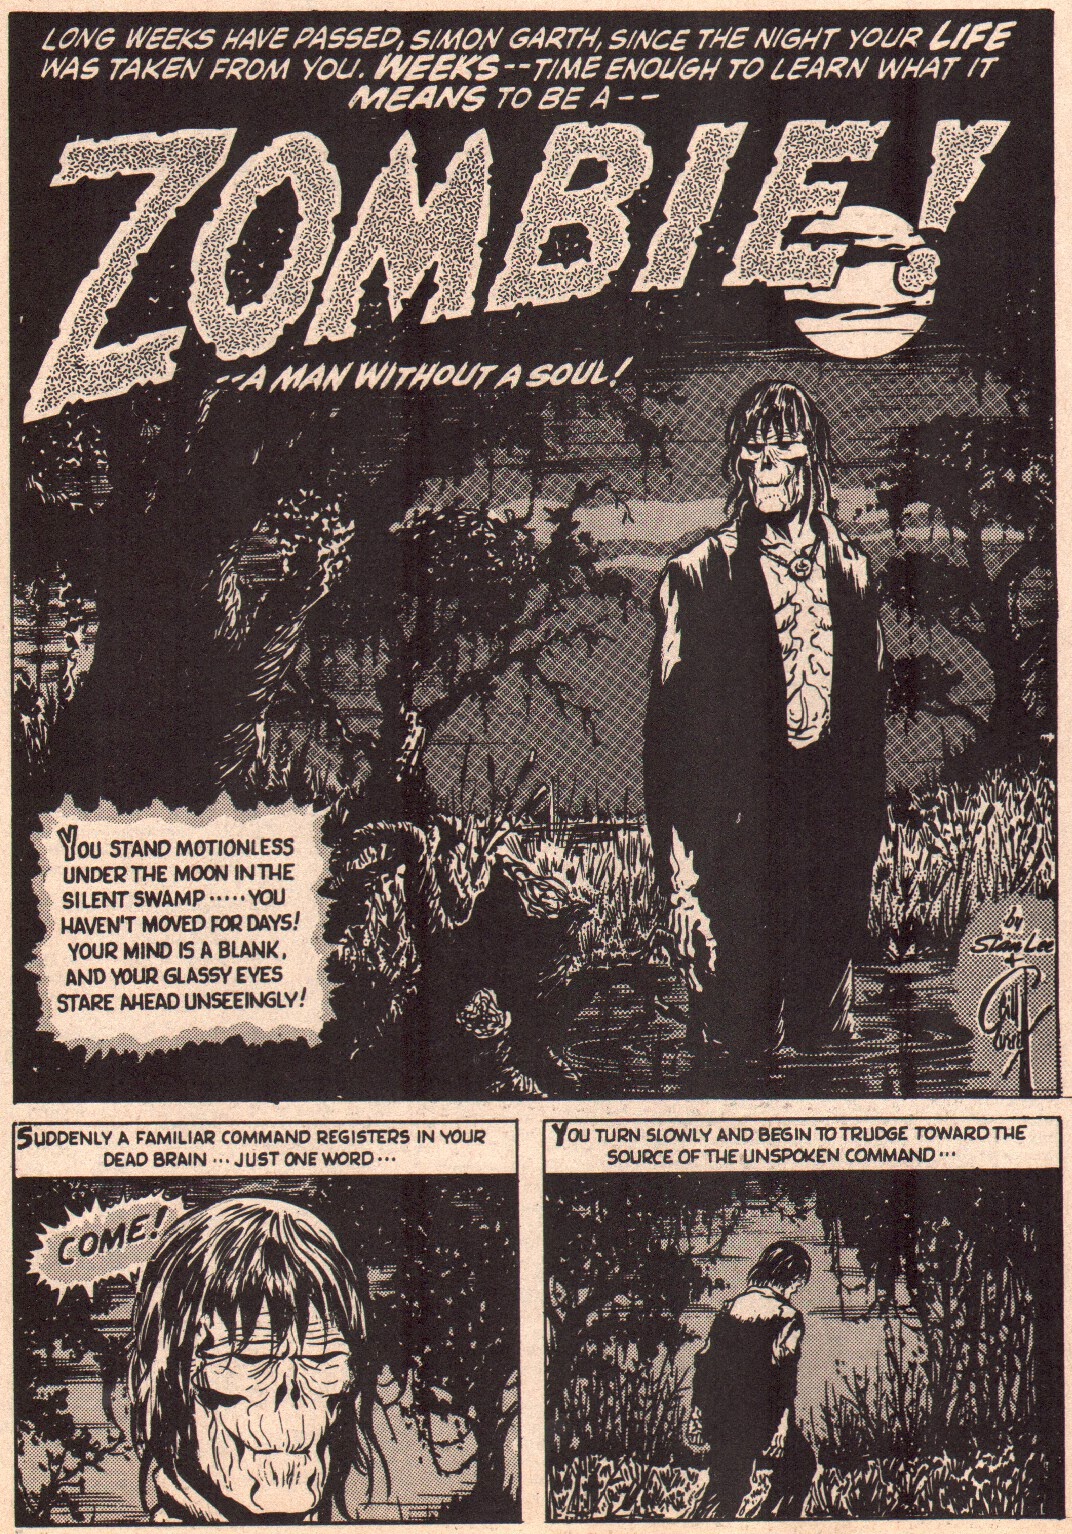 Tales+of+the+Zombie+%231+(1973)+Zombie+p.1.jpg